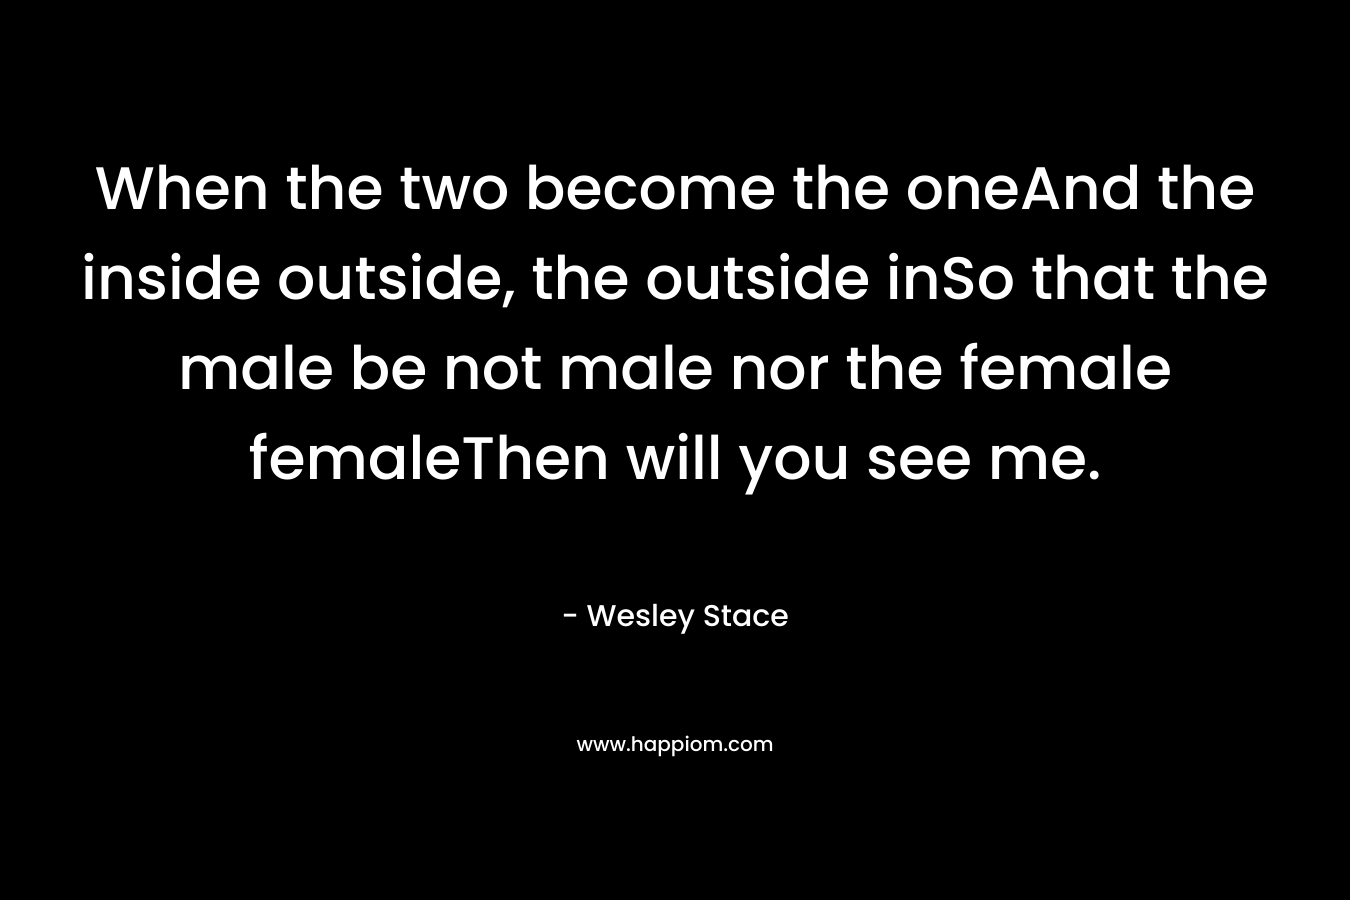 When the two become the oneAnd the inside outside, the outside inSo that the male be not male nor the female femaleThen will you see me.